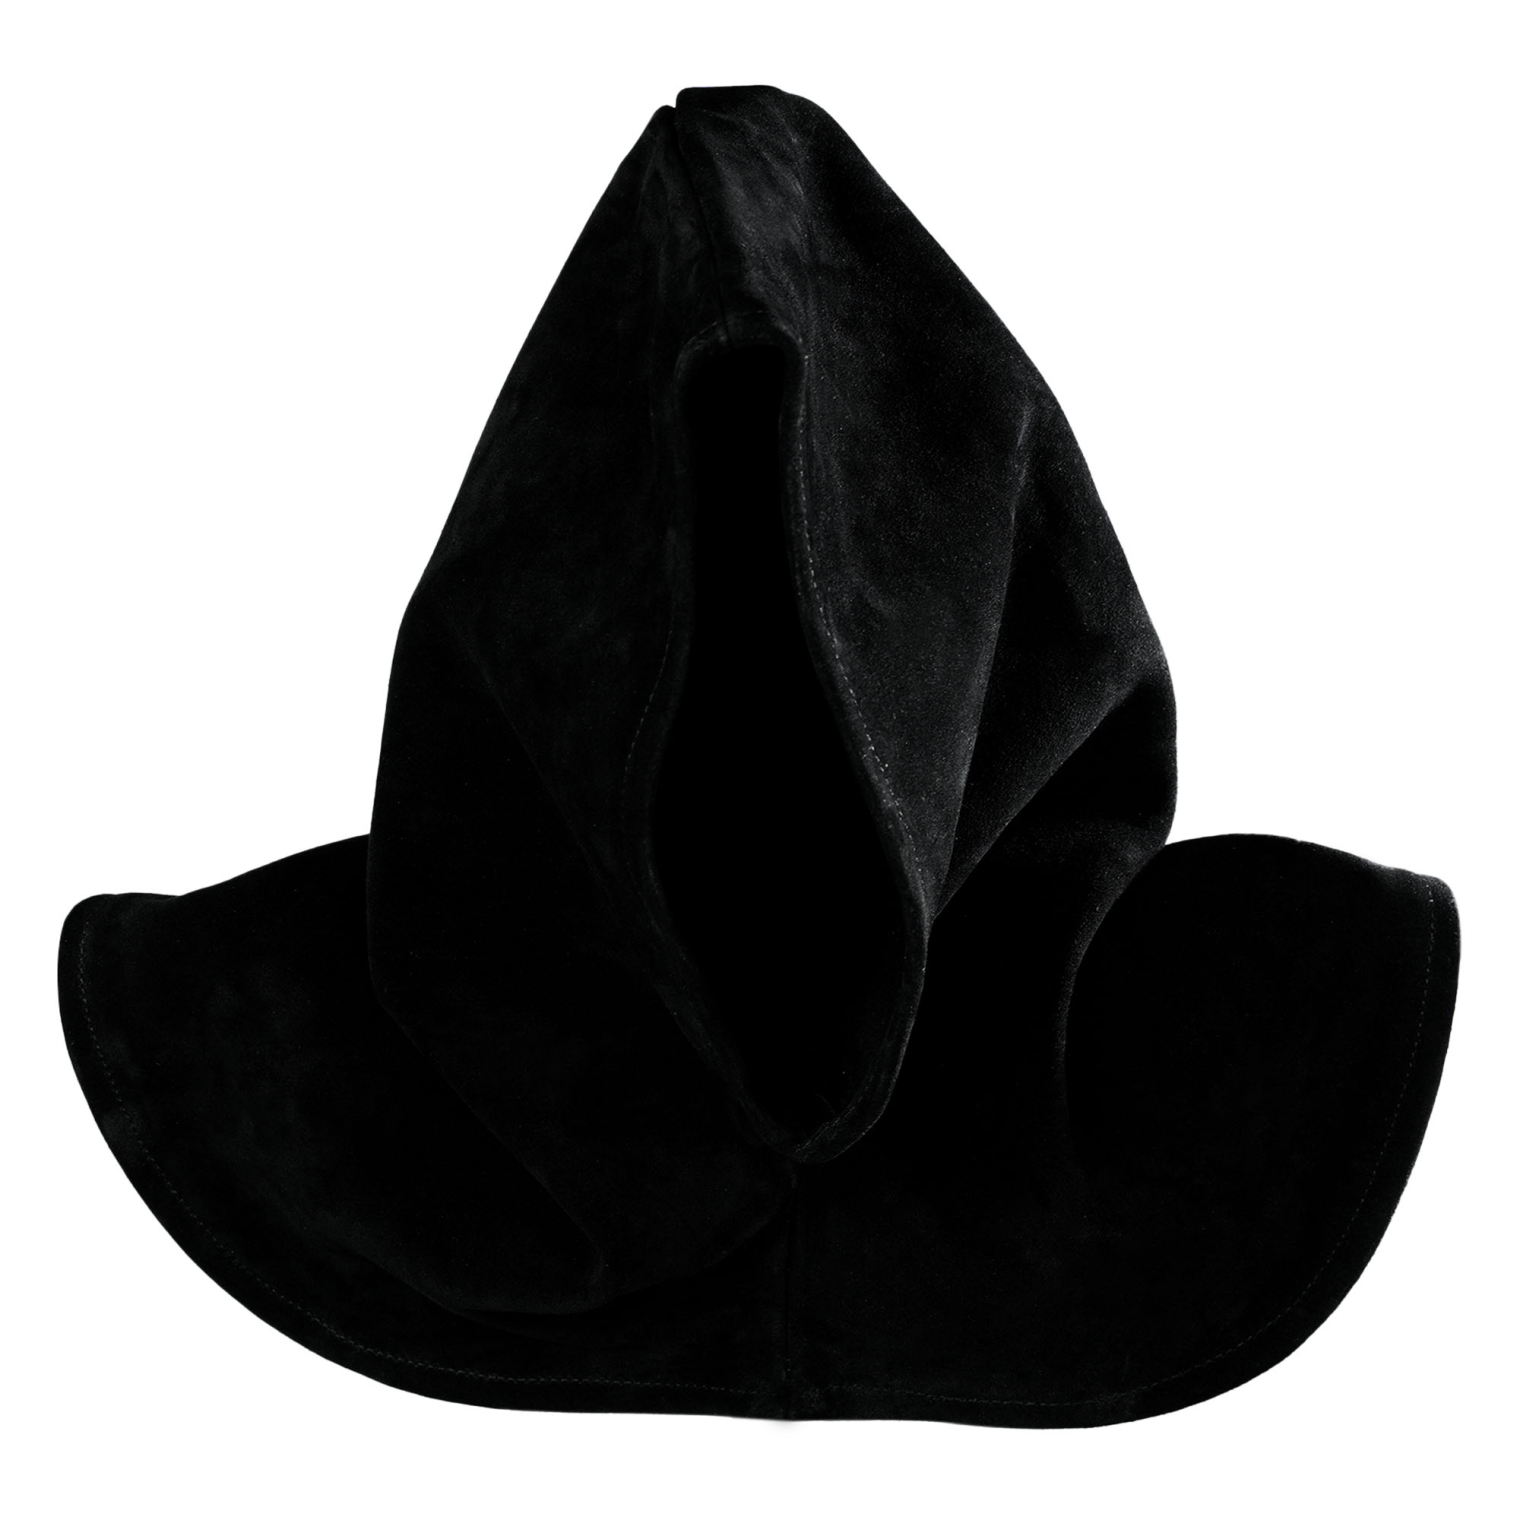 LORD OF BATTLES Executioner Hood - Suede Leather with Collar